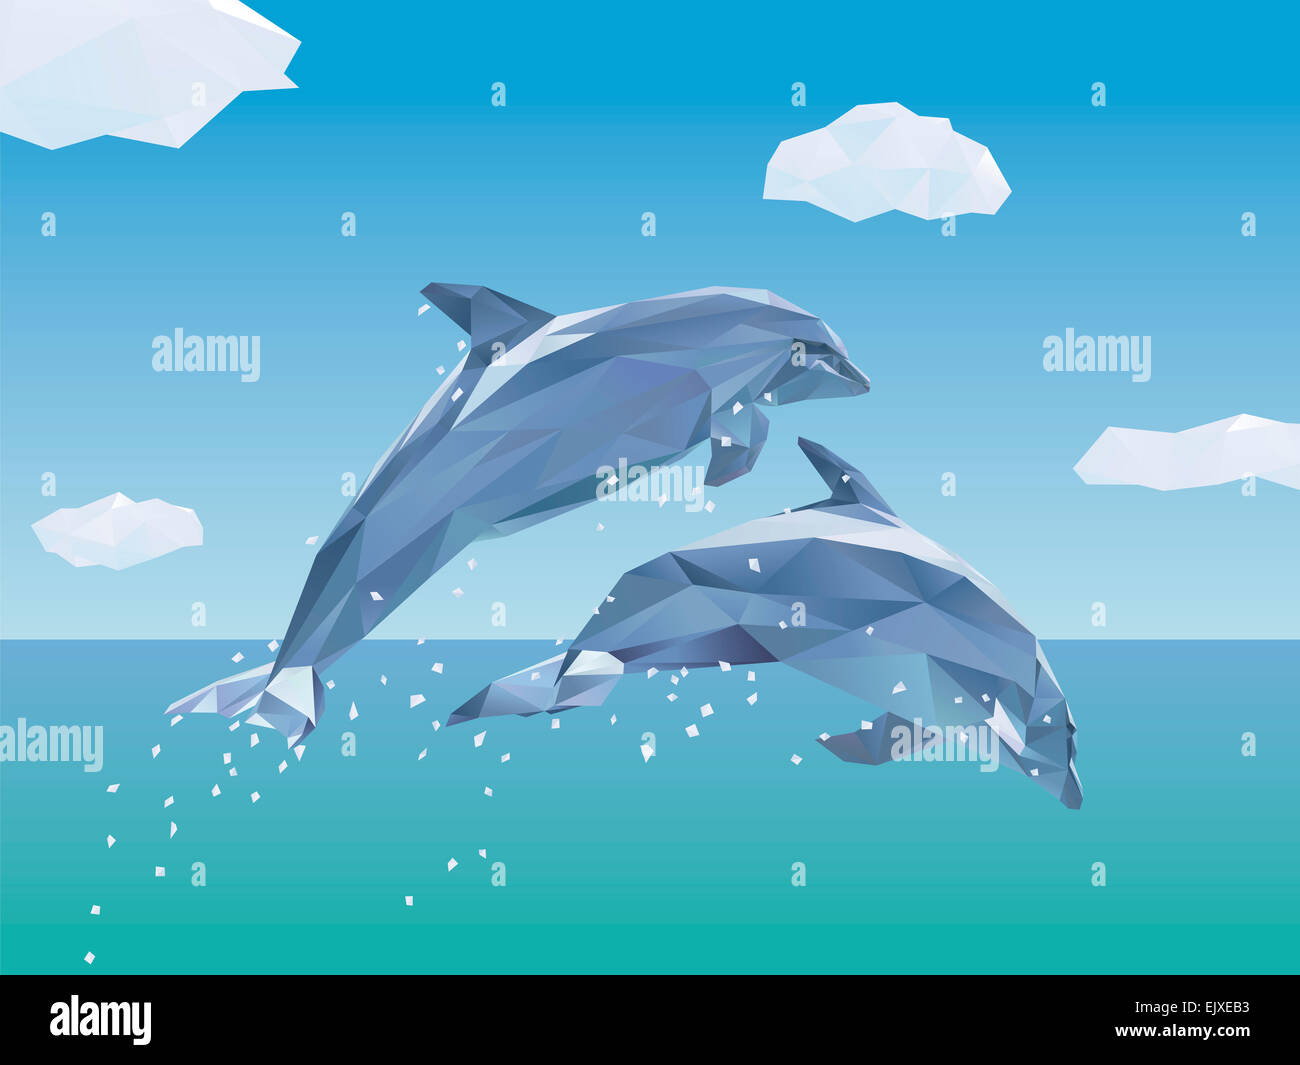 Low Poly Illustration of two Dolphins jumping out of the sea, clouds in the sky Stock Photo